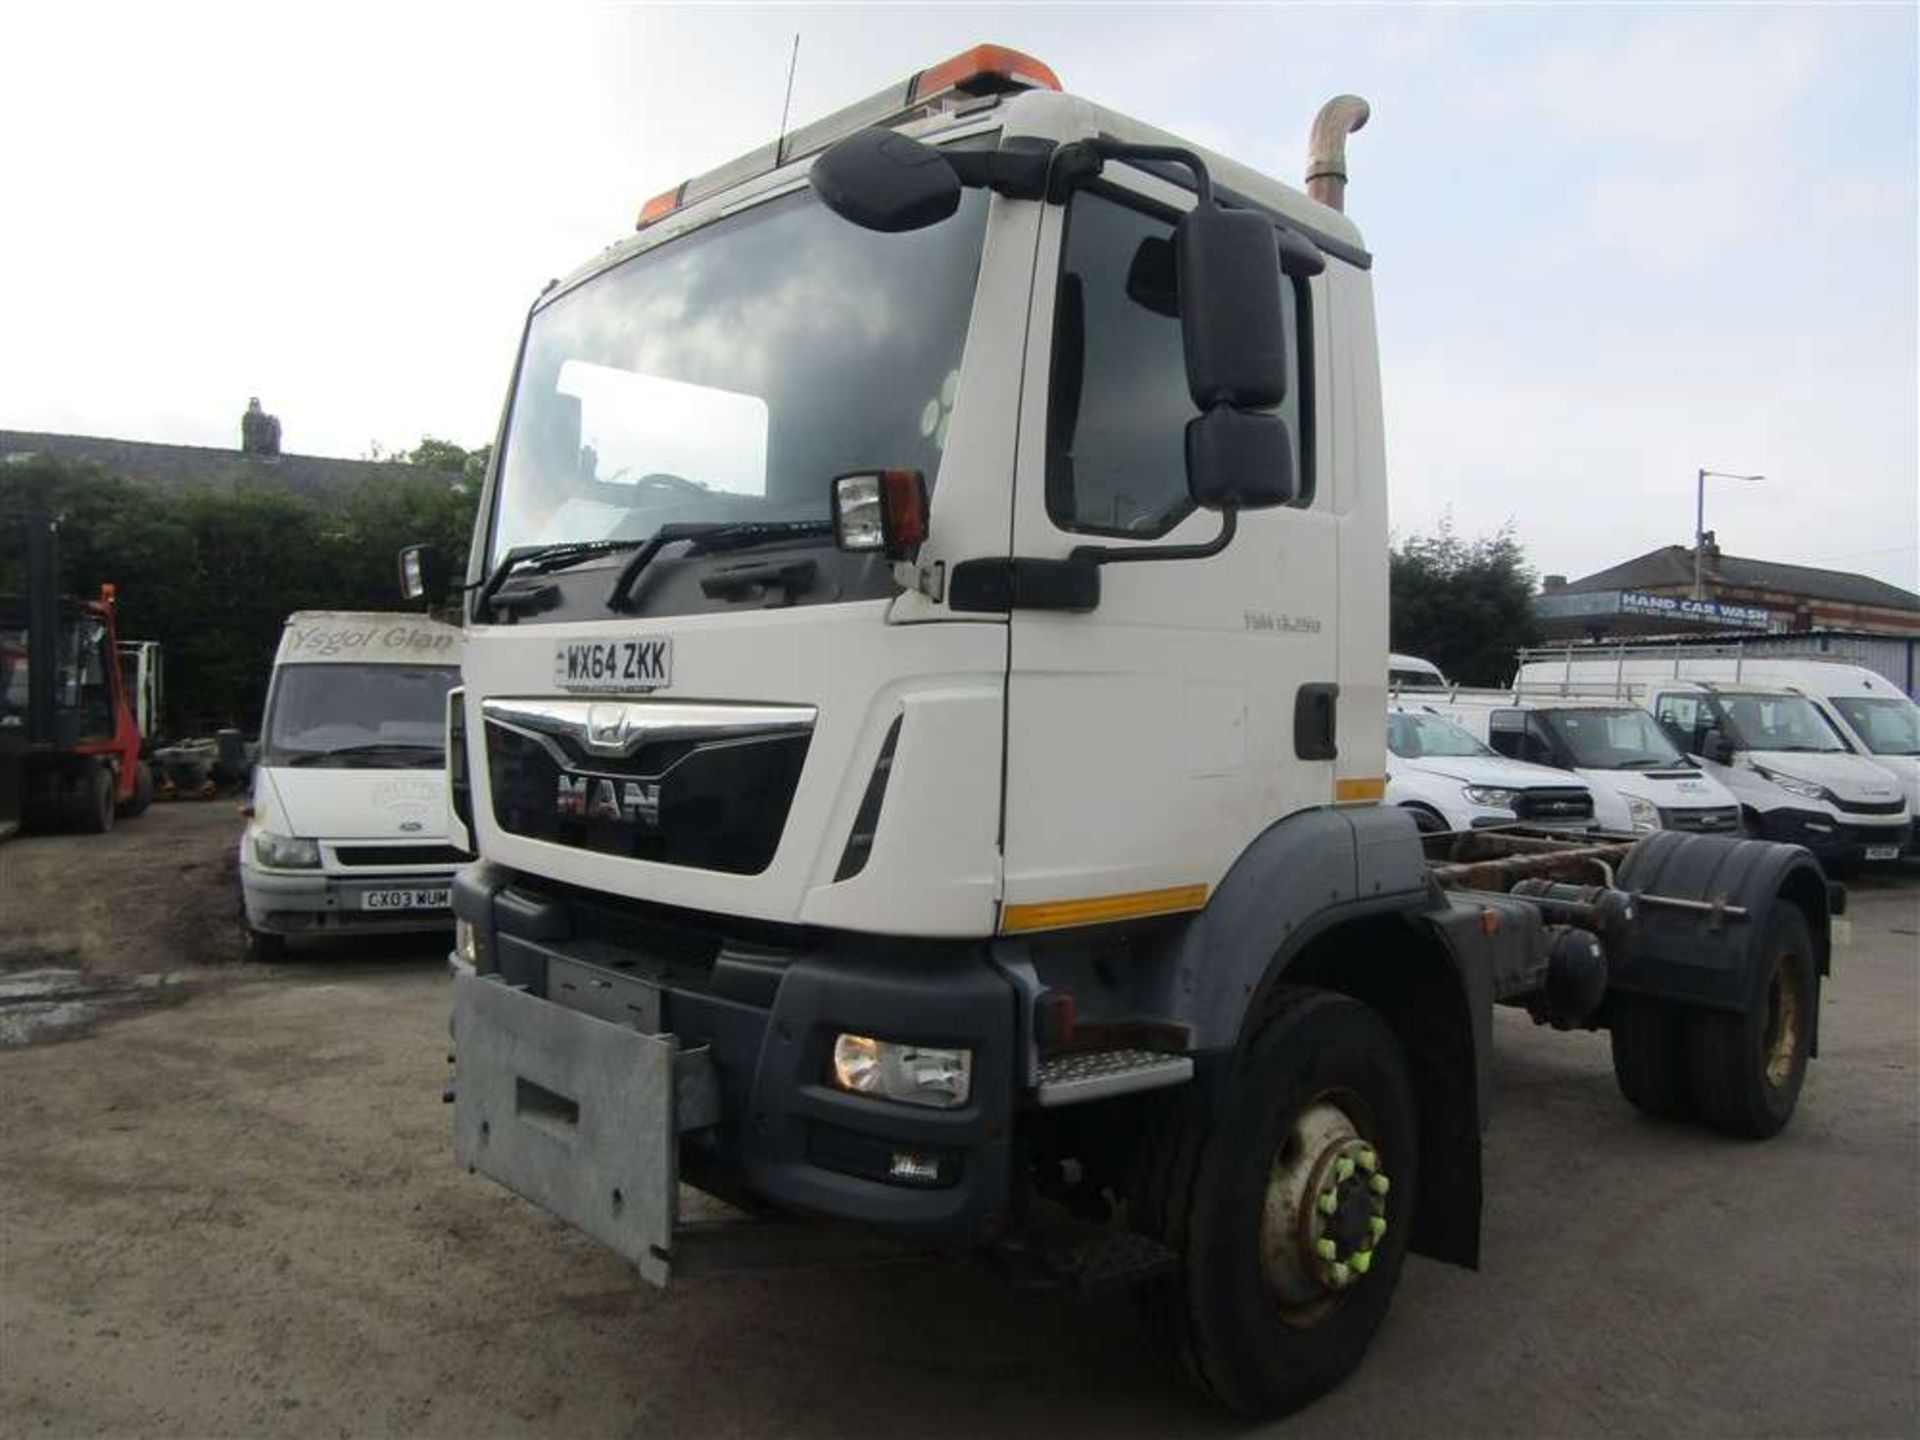 2014 64 reg MAN TGM 13.250 4x4 Chassis Cab (Direct Council) - Image 2 of 10